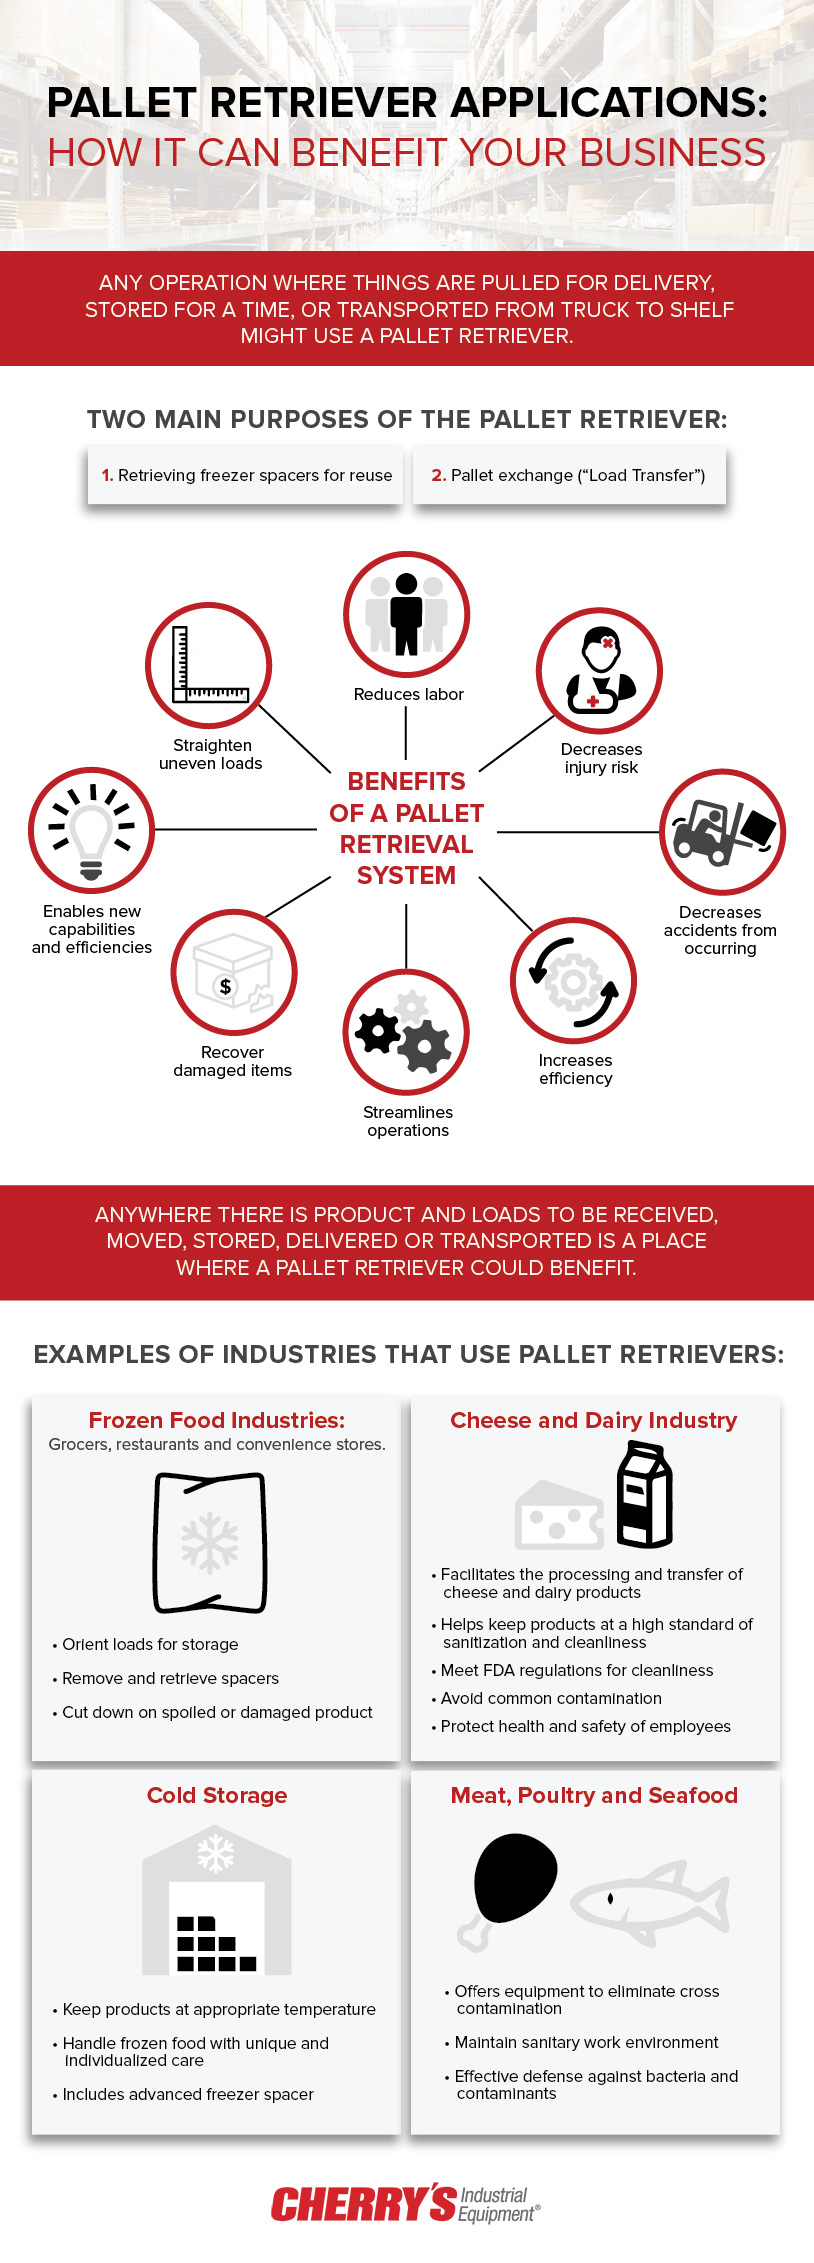 Cherry's Pallet Retriever Applications: How It Can Benefit Your Business